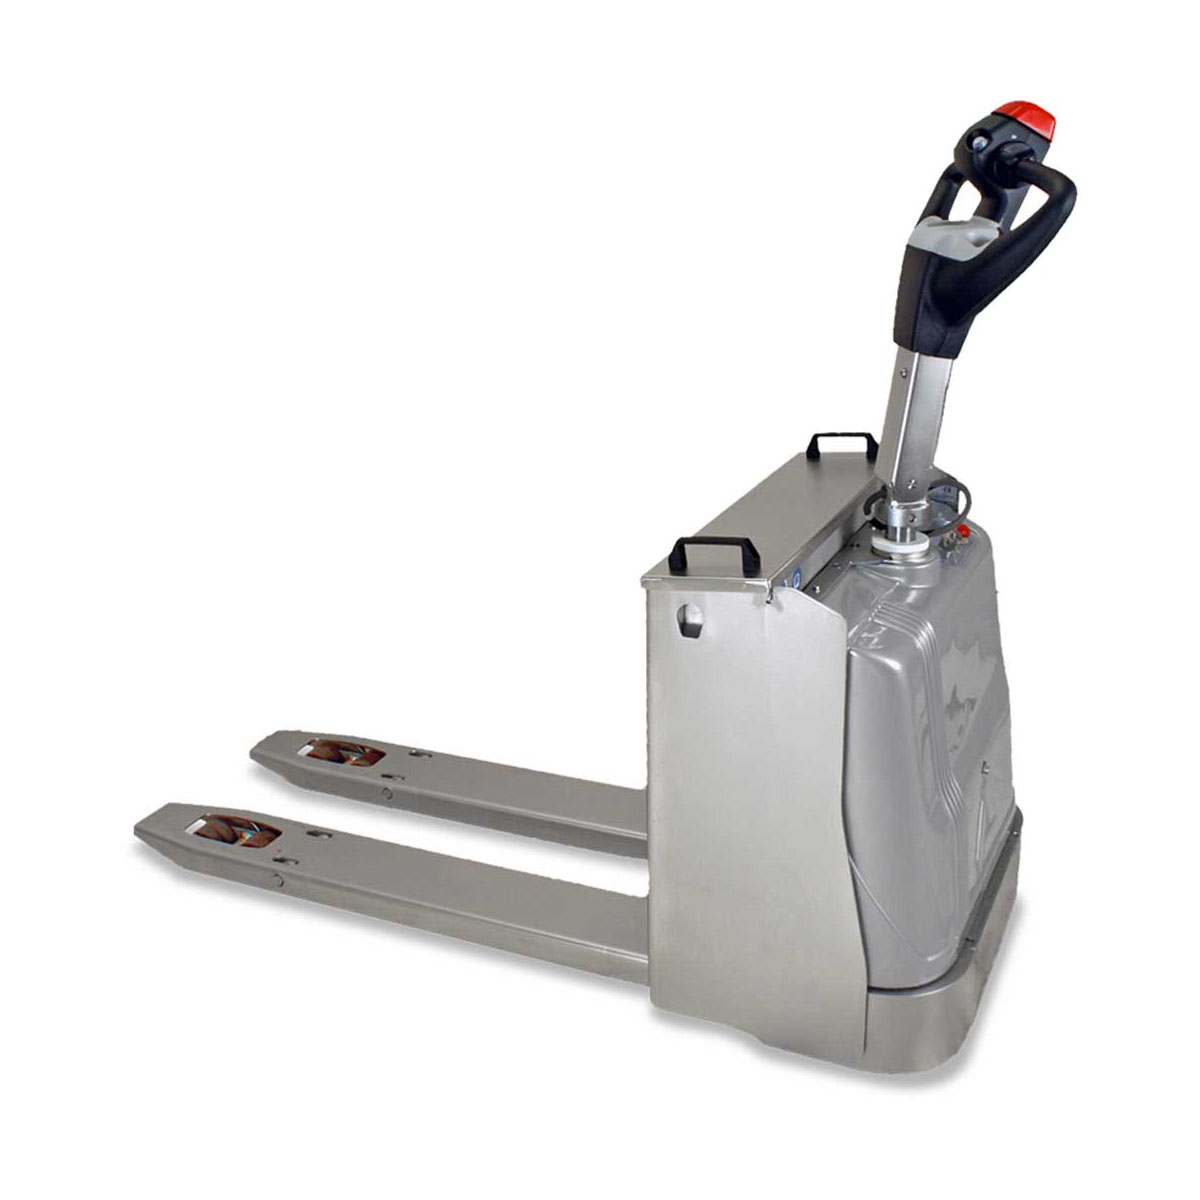 Buy Electric Pallet Trucks (Stainless Steel) available at Astrolift NZ